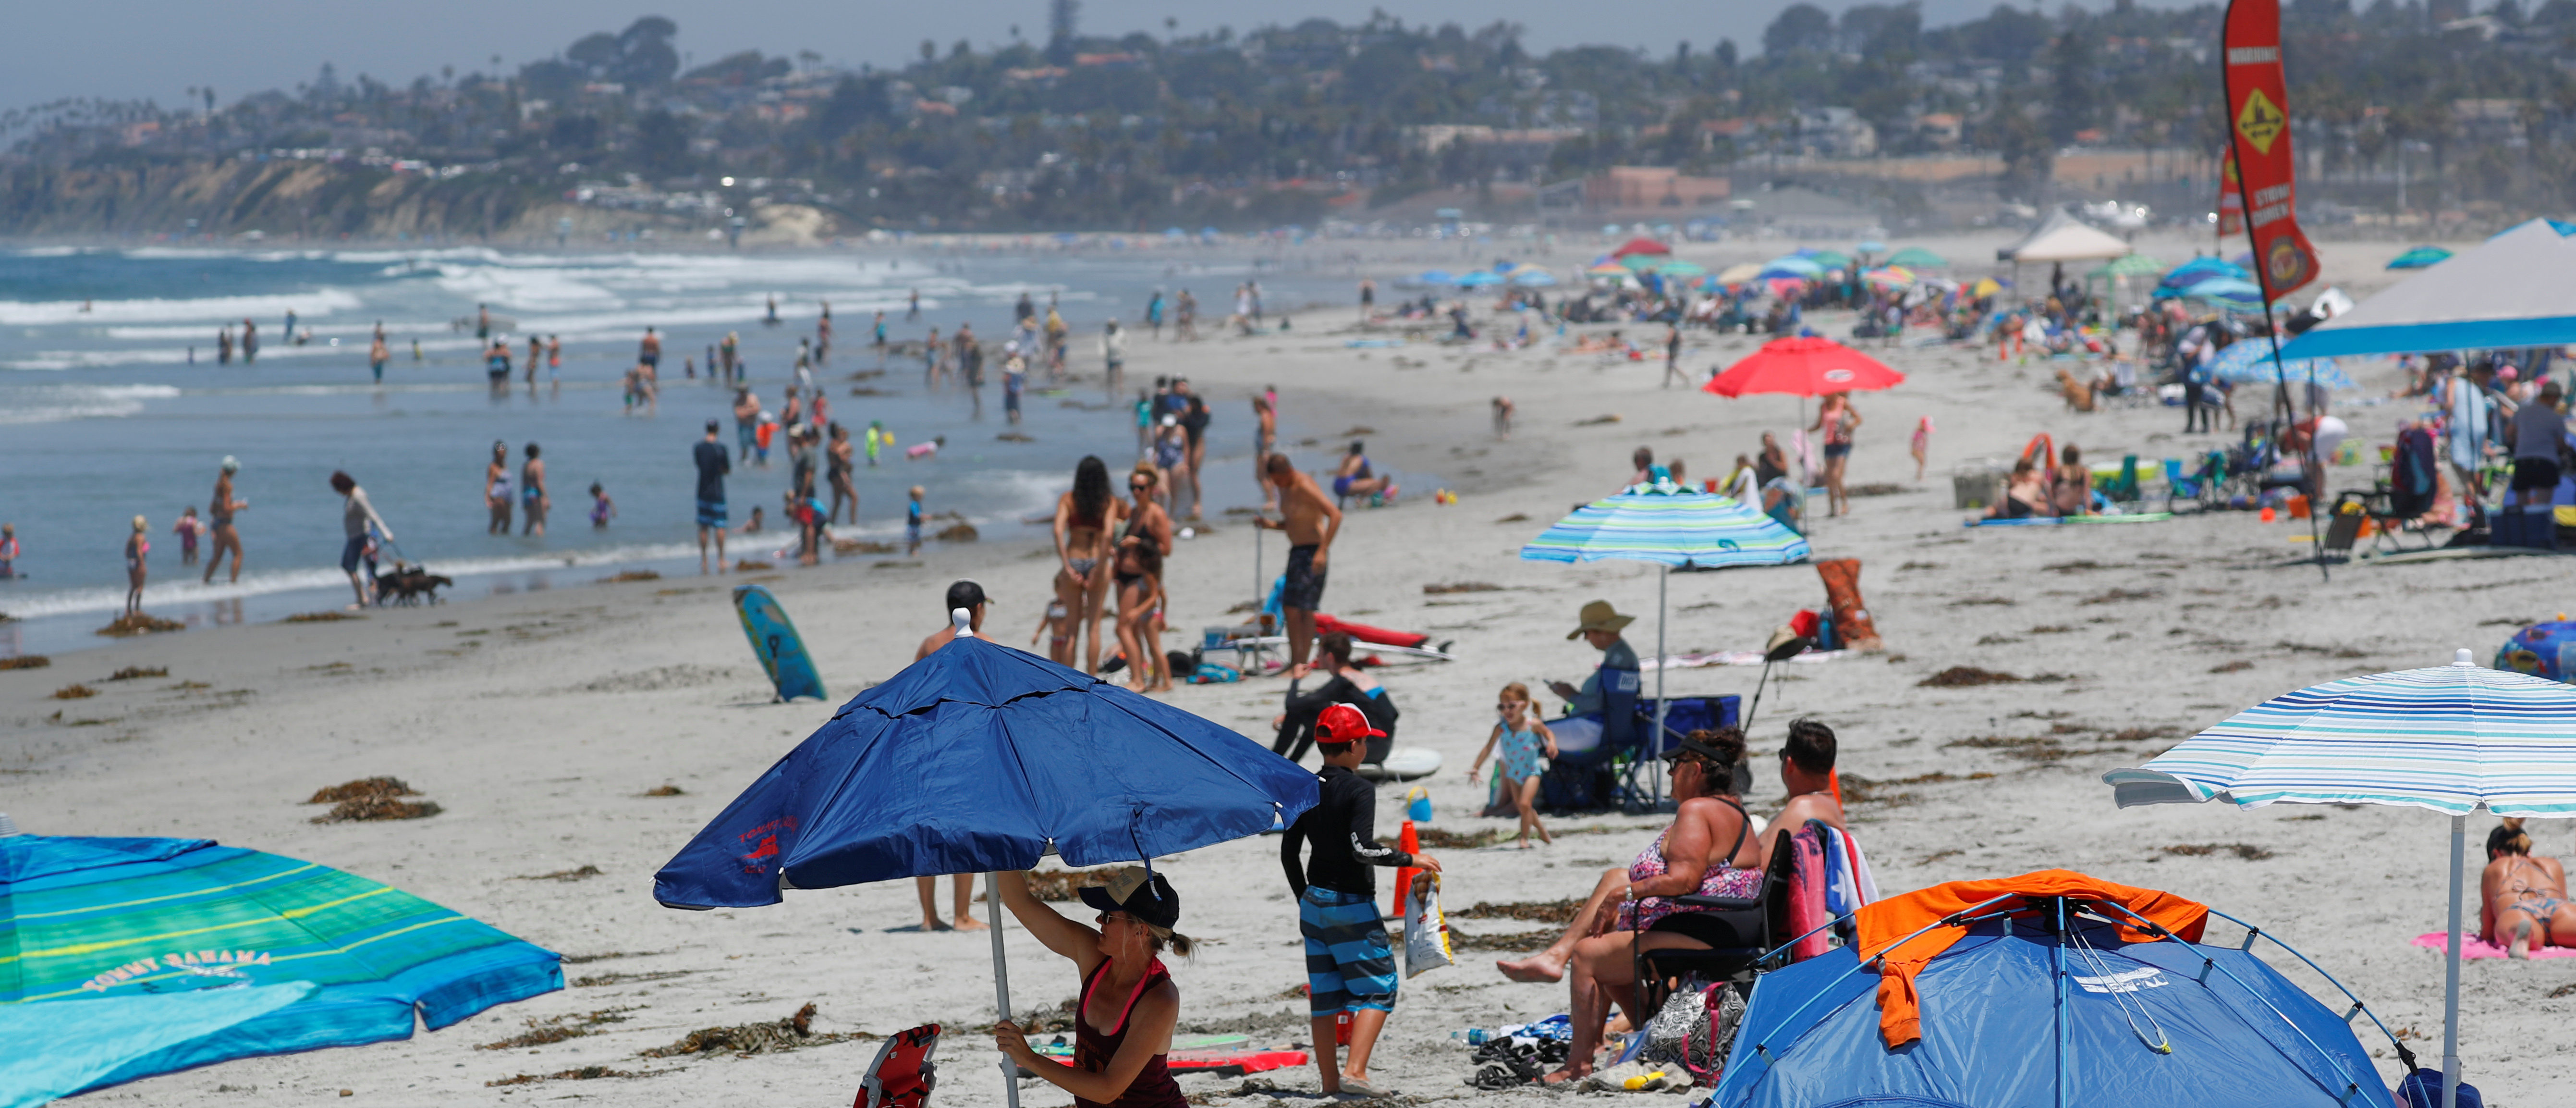 Record Temperature Readings Throughout Los Angeles Caused By ‘Faulty